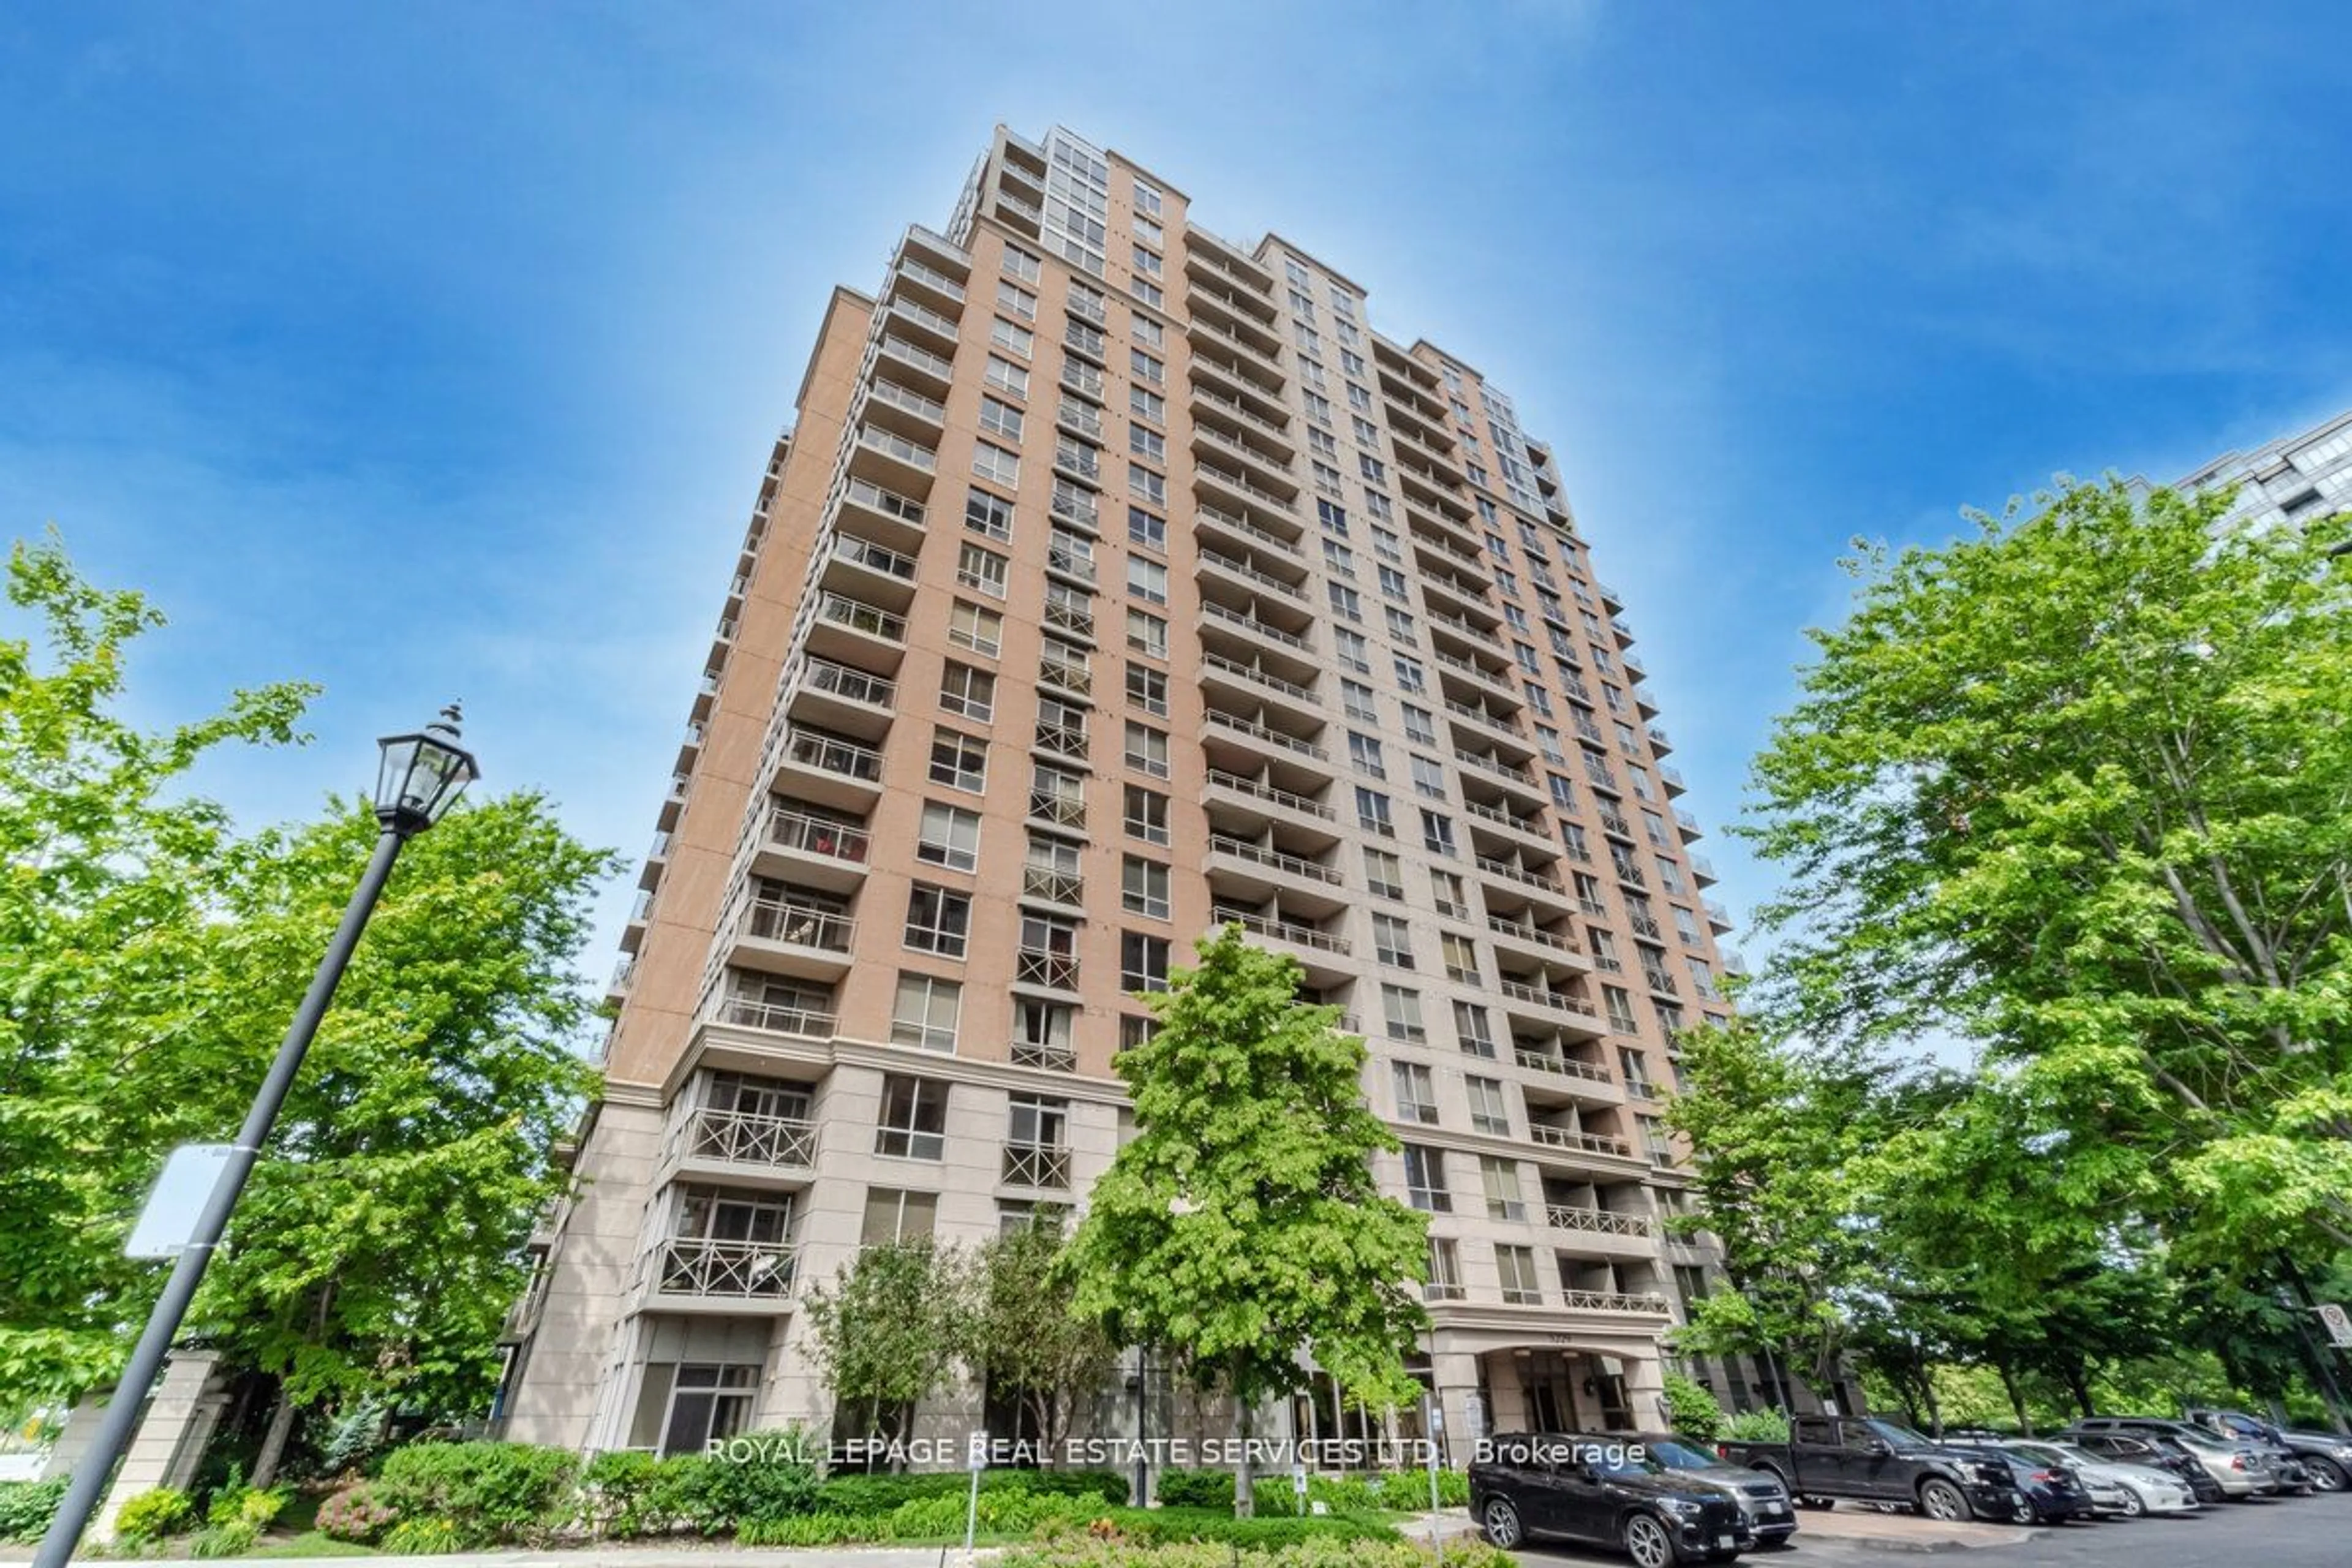 A pic from exterior of the house or condo for 5229 Dundas St #2110, Toronto Ontario M9B 6L9